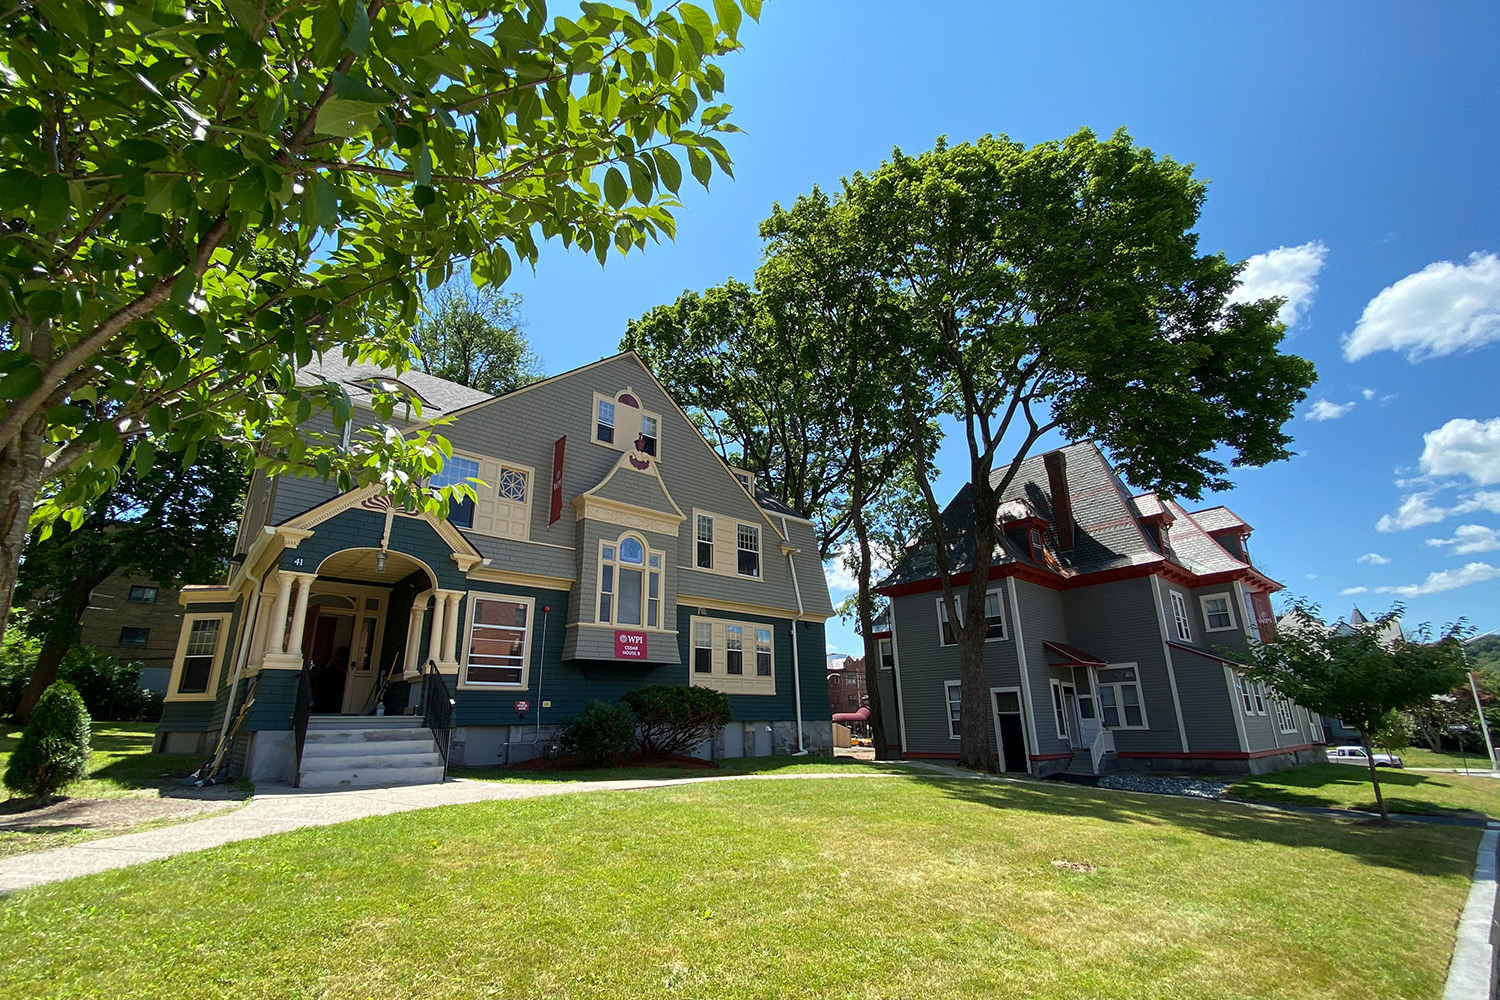 Renovated Victorian homes into student housing